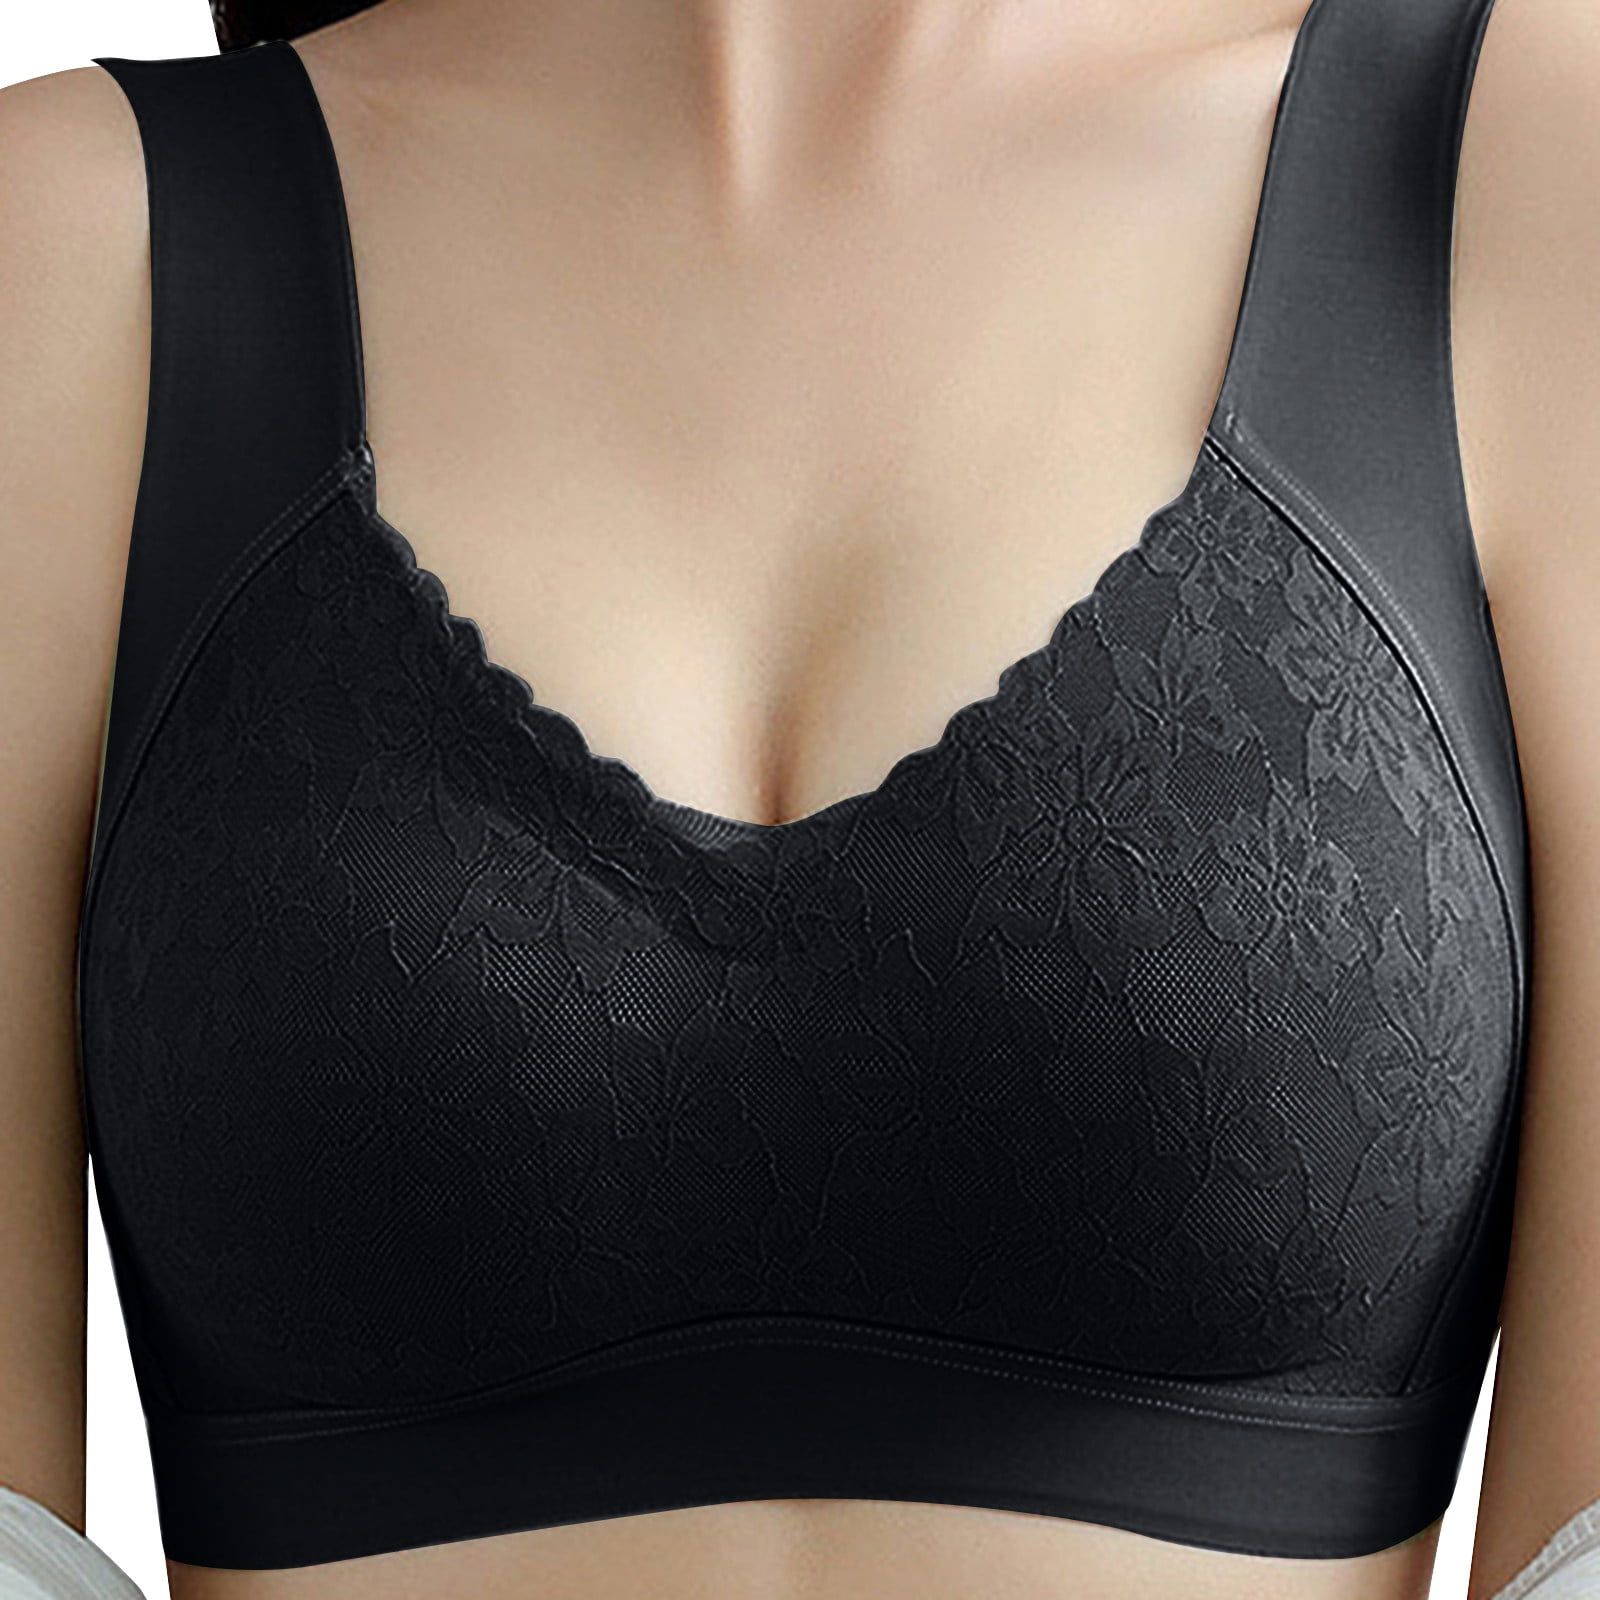 Light Support Strappy Sports Bra for Women